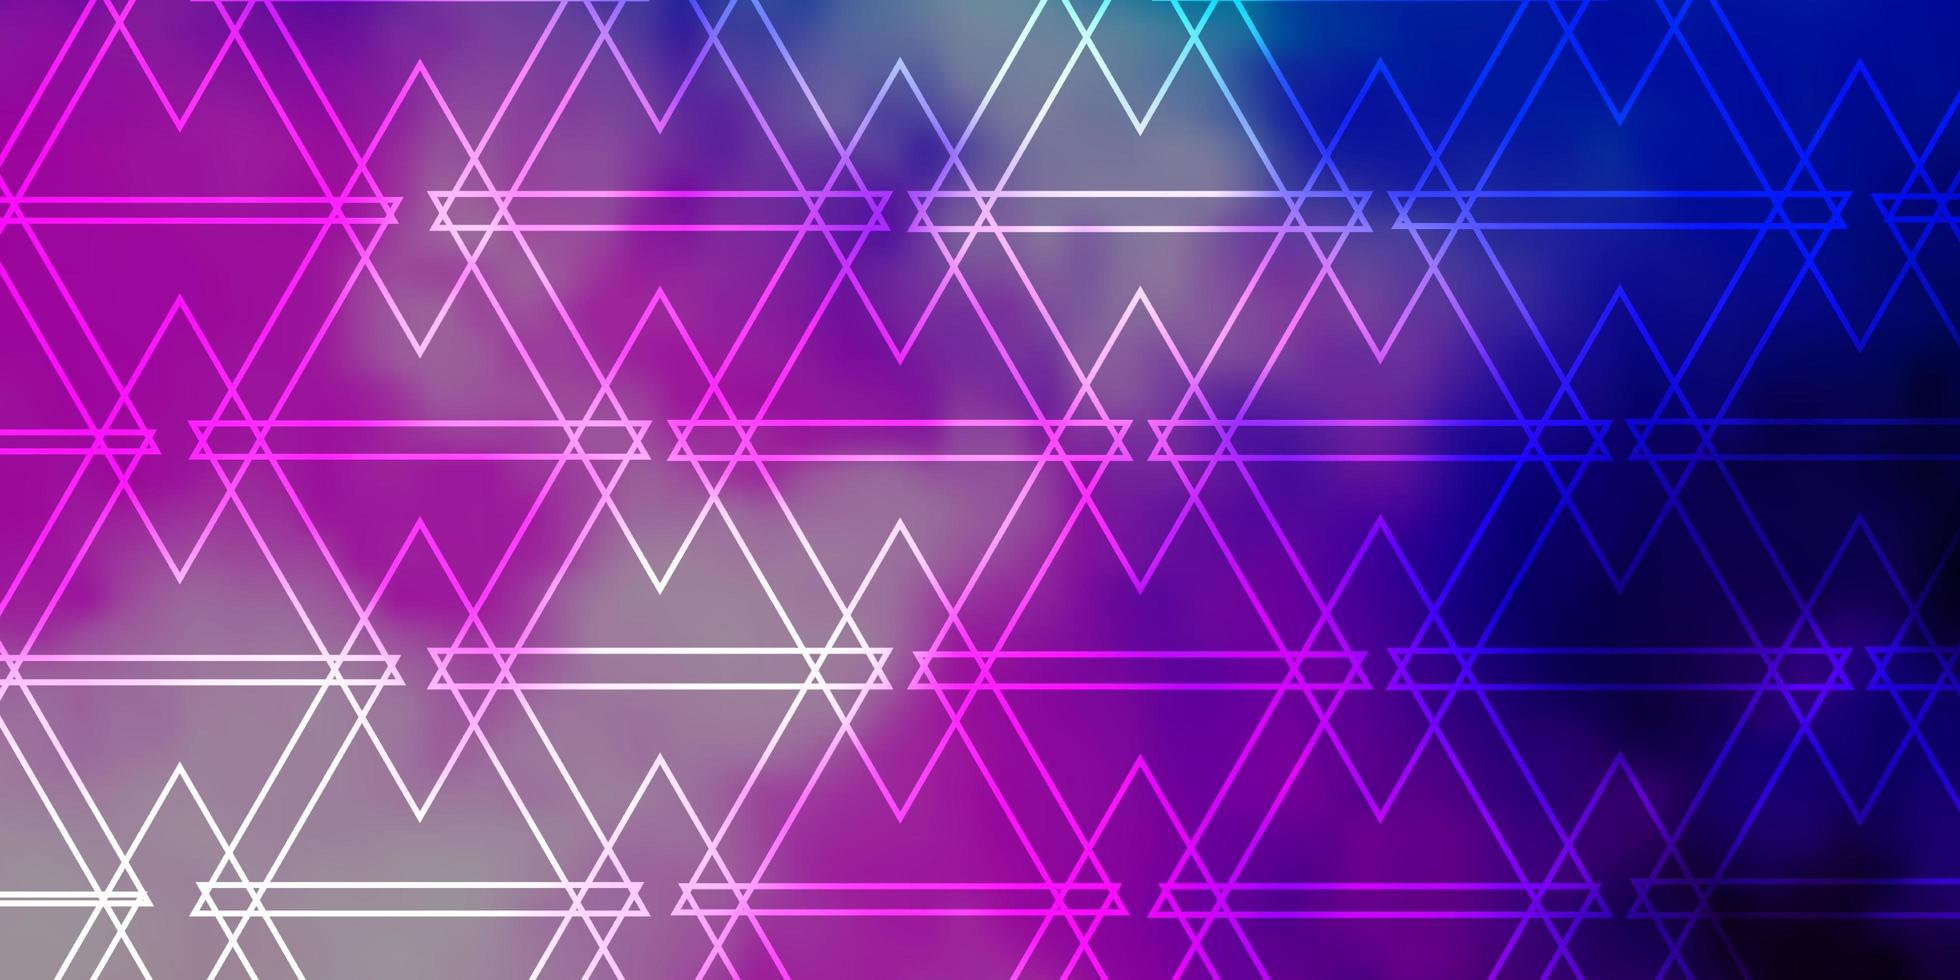 Light Pink, Blue vector pattern with lines, triangles. Abstract gradient design with colorful triangles. Best design for posters, banners.